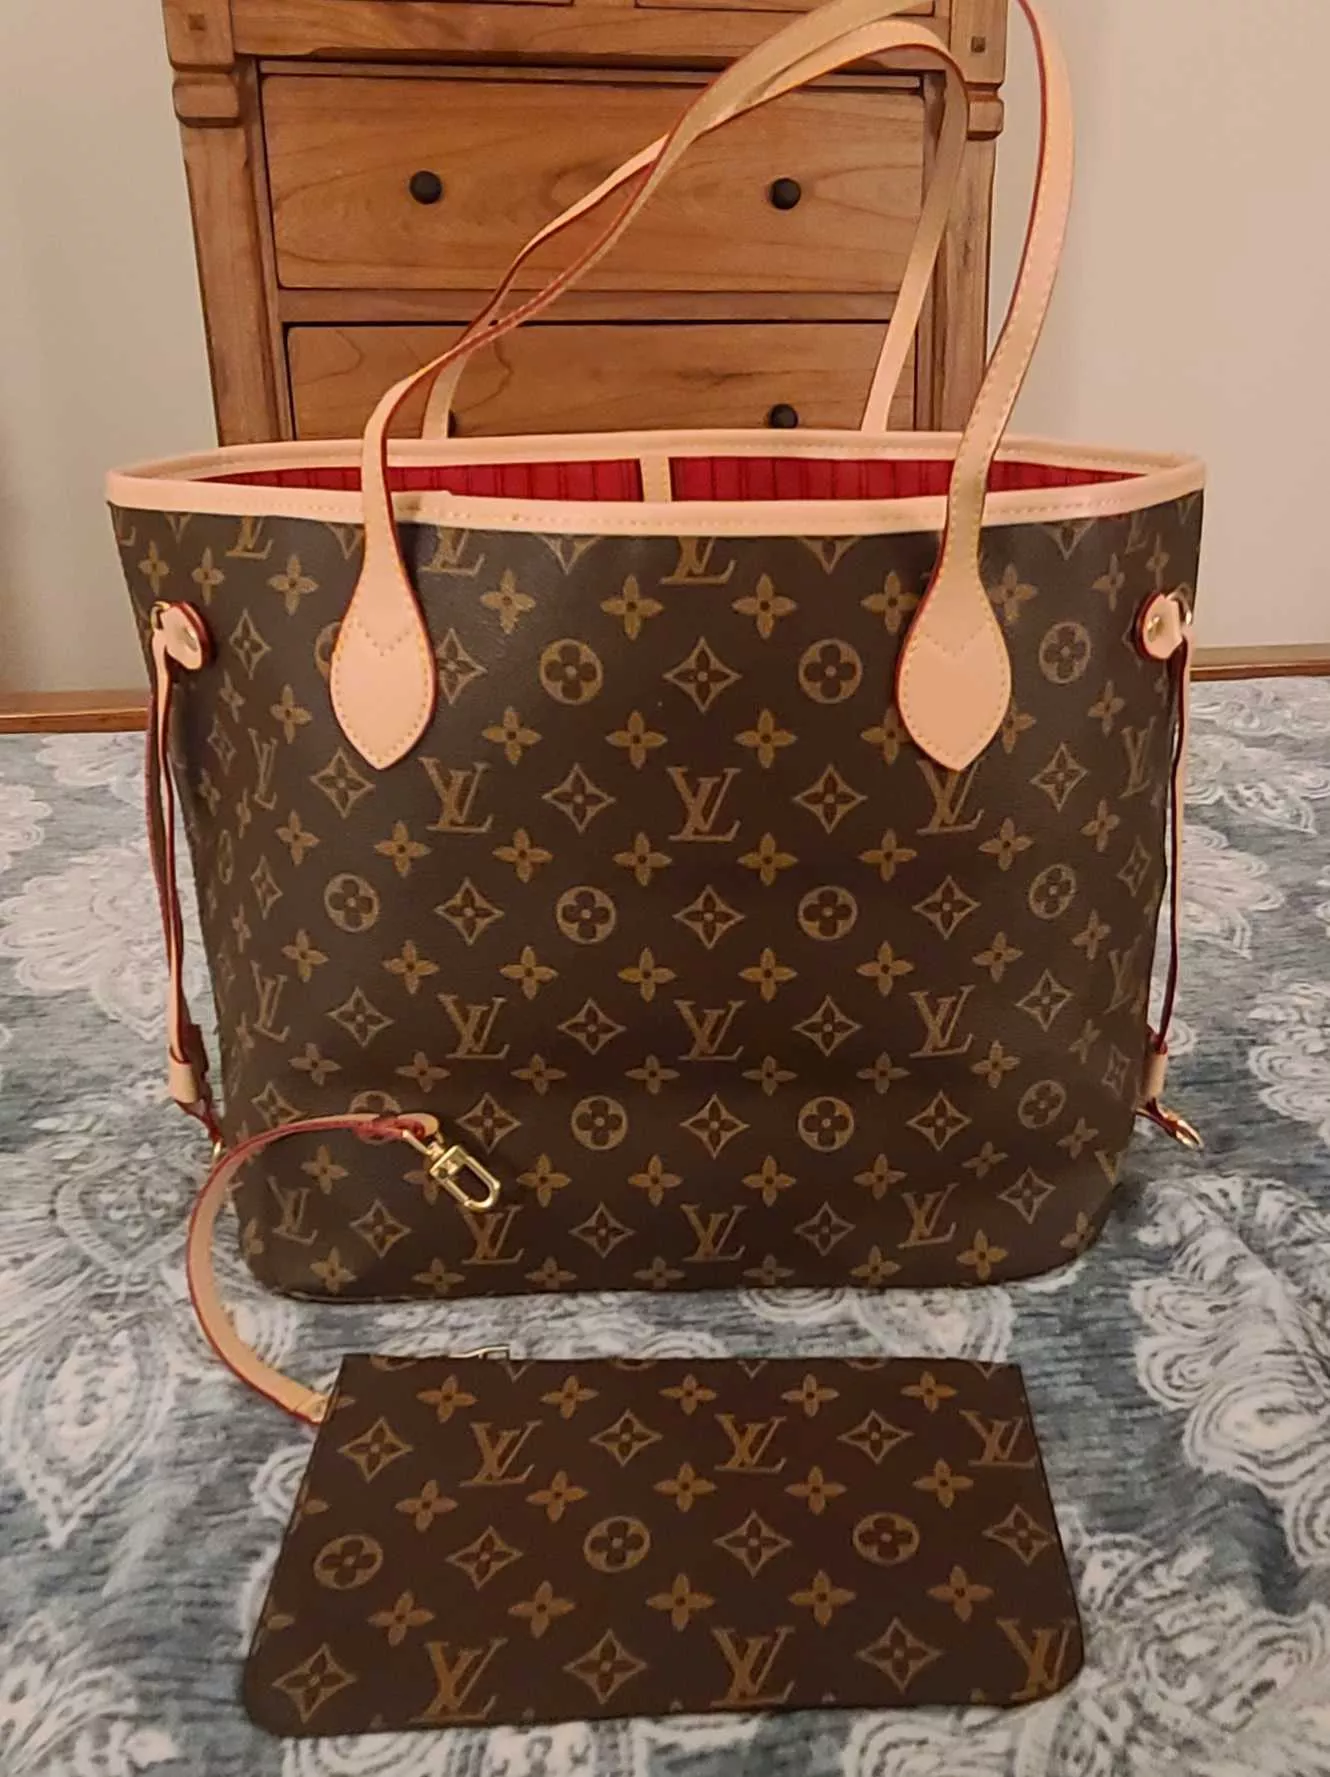 These 11 Louis Vuitton Neverfull Dupes WILL STEAL THE SHOW!